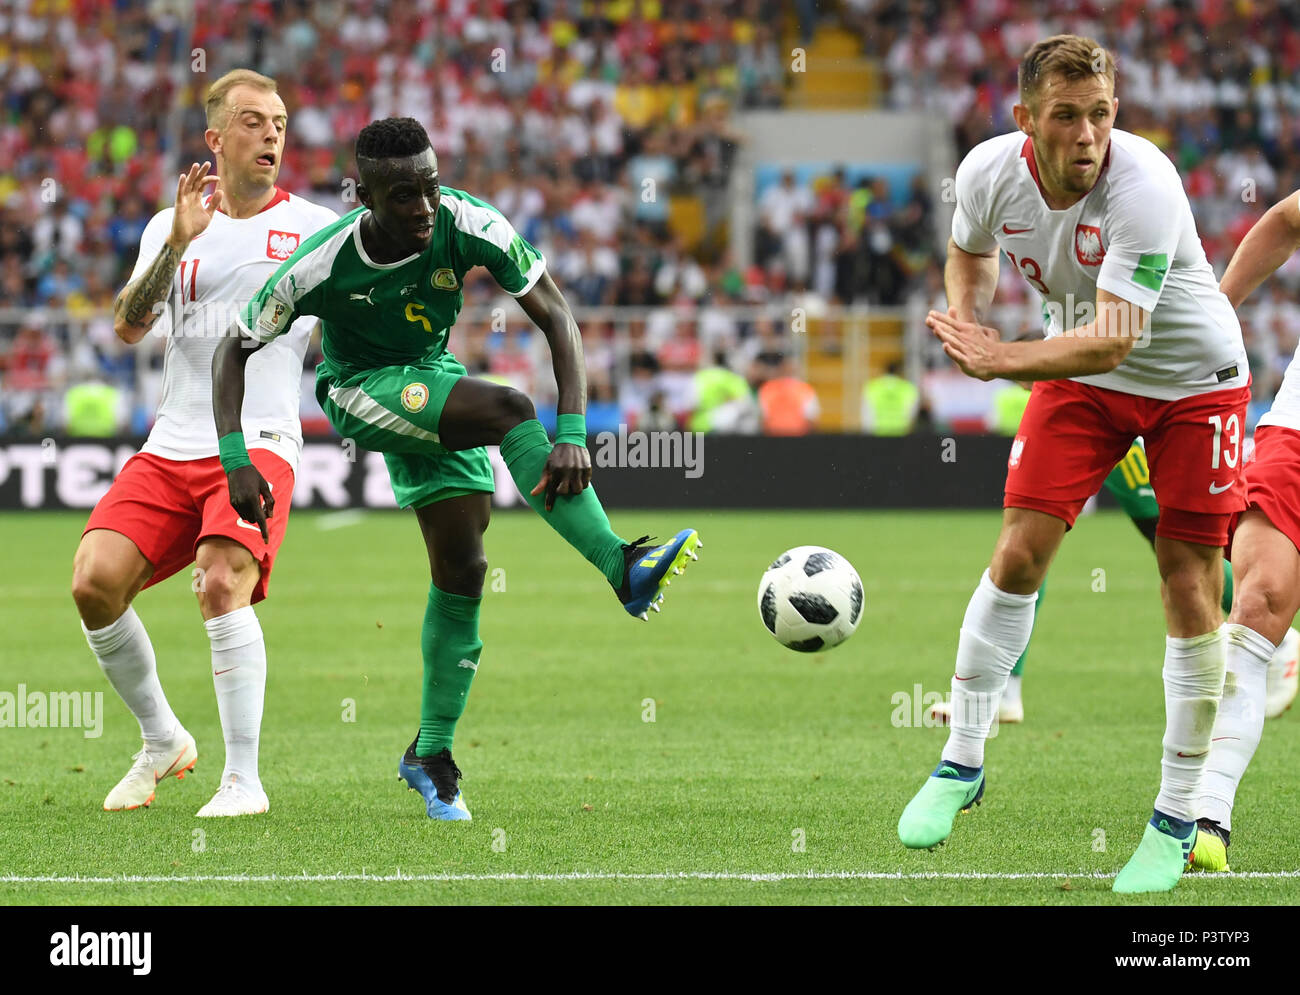 Moscow, Russia. 19th June, 2018. Soccer: World Cup 2018, group stages, group H: Poland vs Senegal at Spartak Stadium. Poland's Kamil Grosicki (L) and Maciej Rybus (R) and Senegal's Idrissa Gueye (C) vie for the ball. Credit: Federico Gambarini/dpa/Alamy Live News Stock Photo